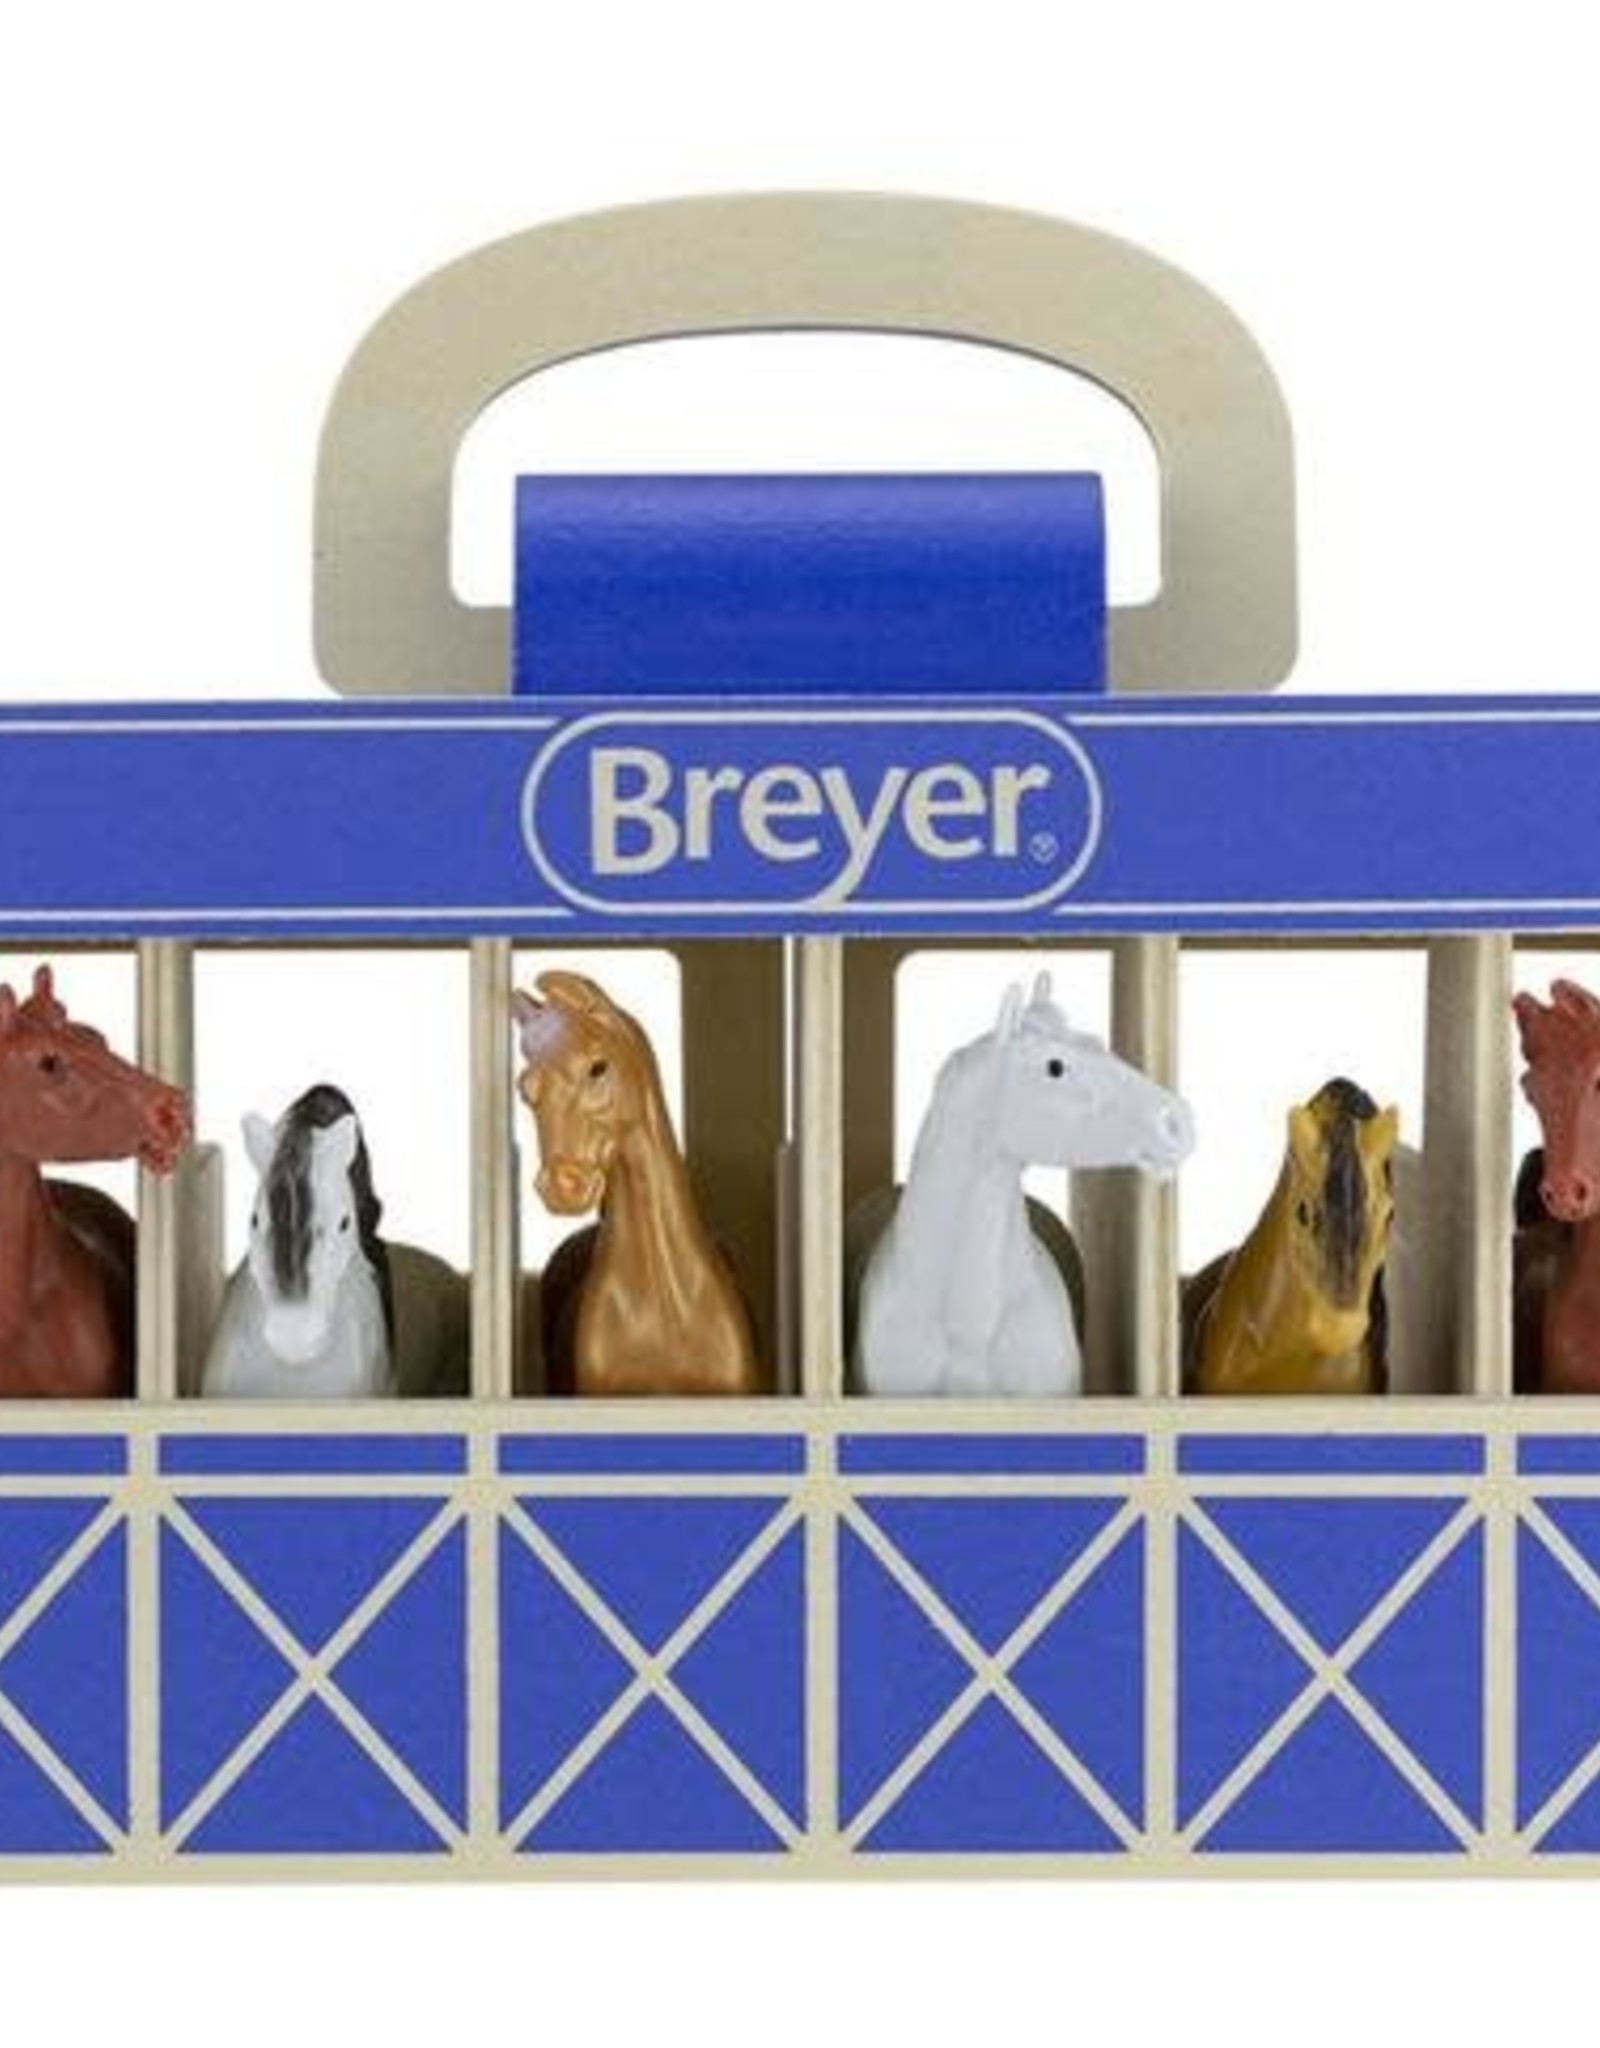 BREYER REEVES HORSE STABLE WOODEN CARRY CASE BLUE